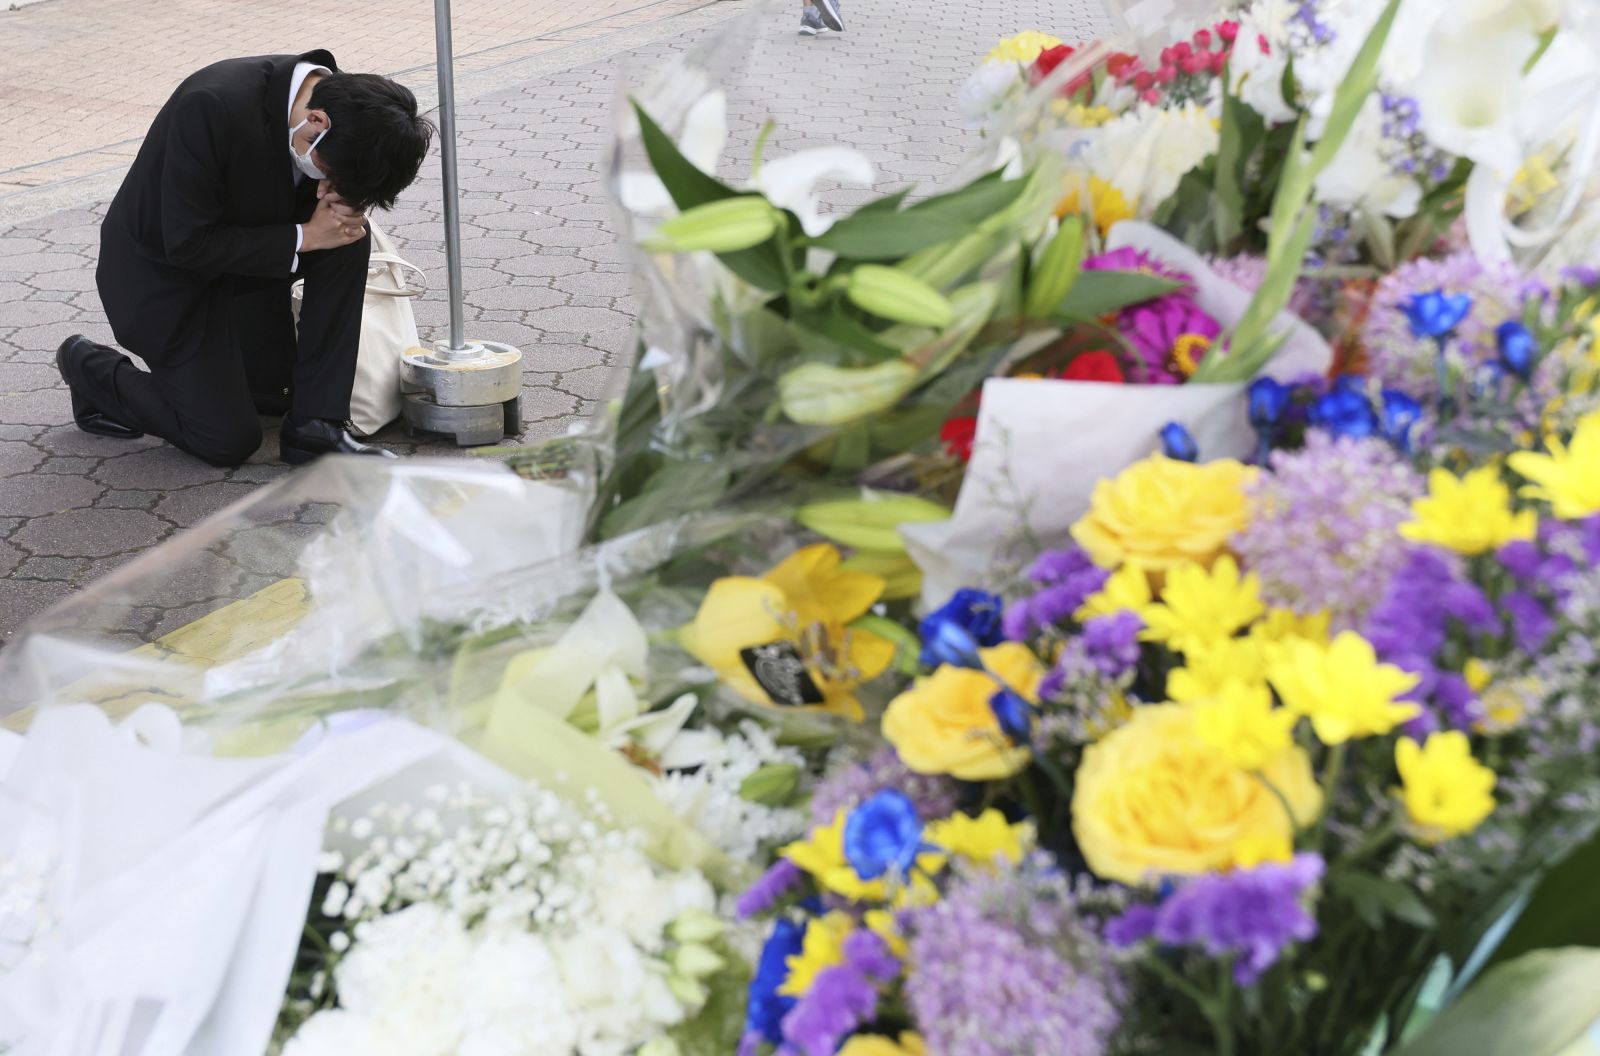 People offer flowers and prayers near a site where former prime minister Shinzo Abe was shot.